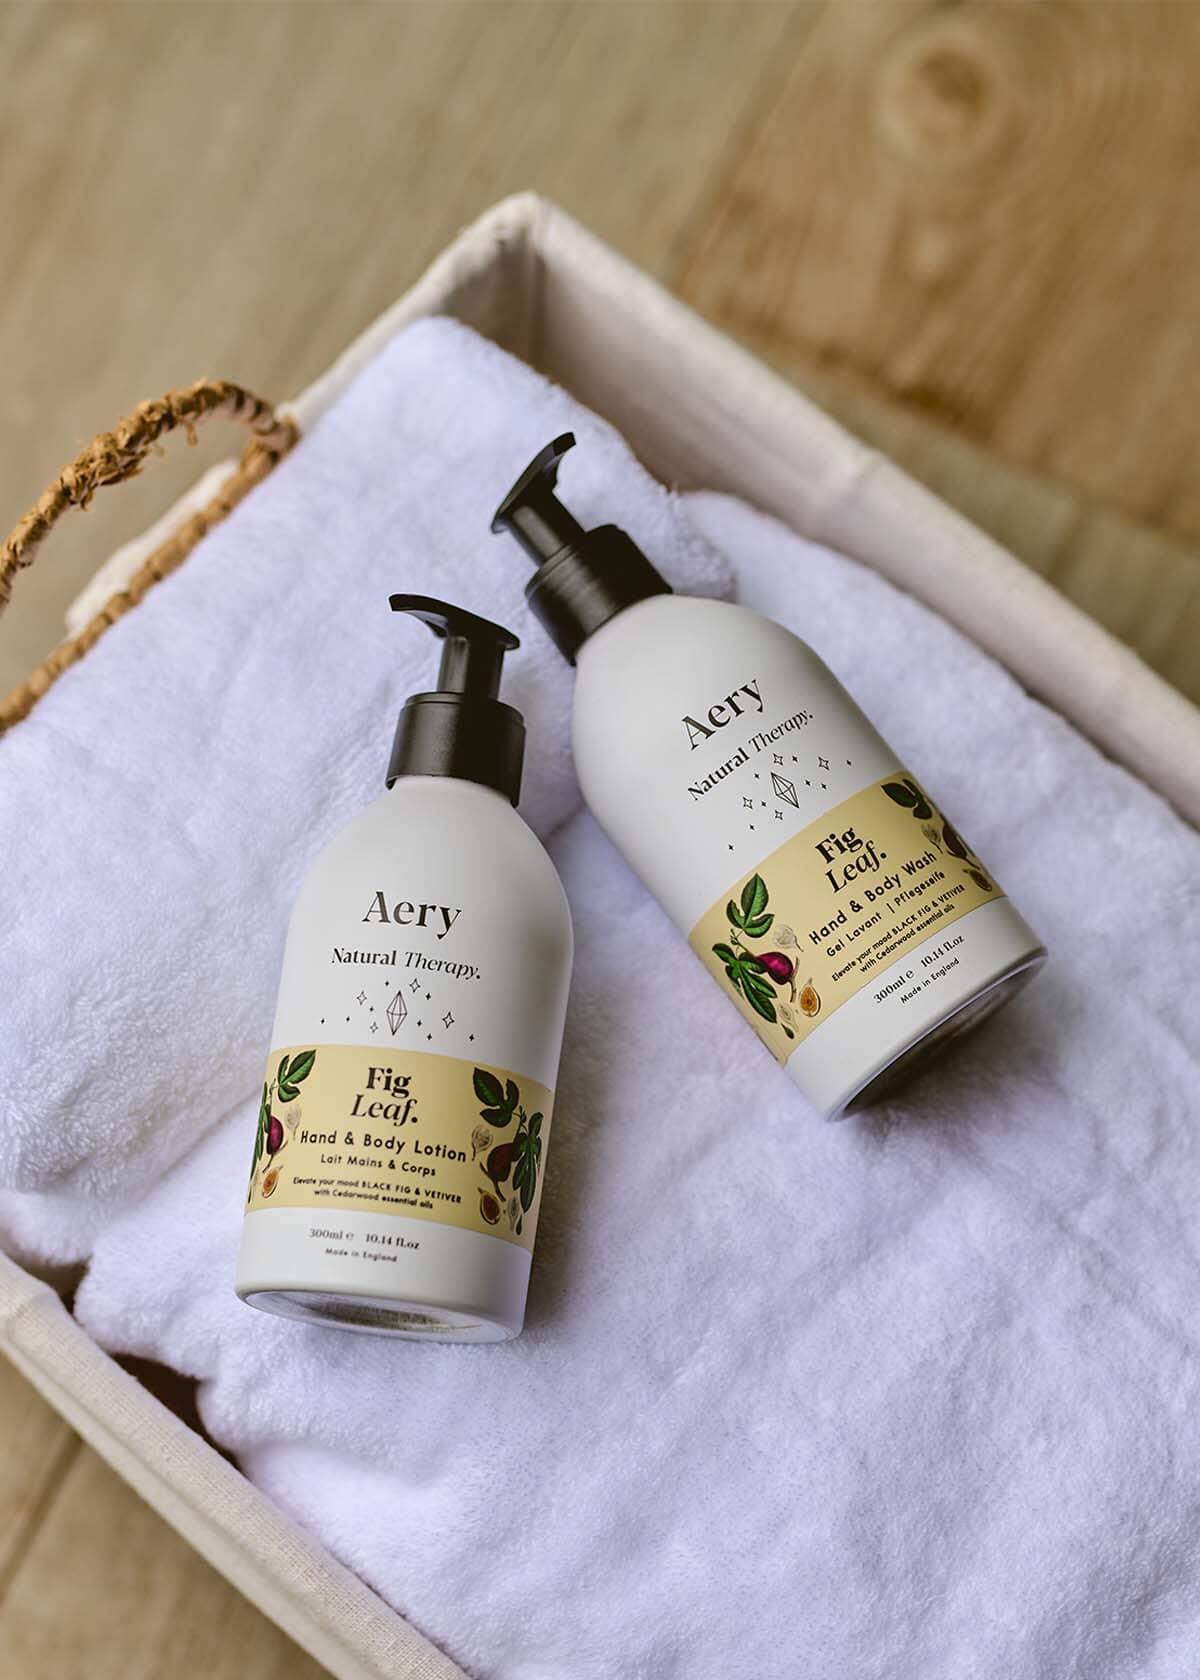 Cream Fig Leaf hand and body wash and lotion duo displayed on white towel in basket 